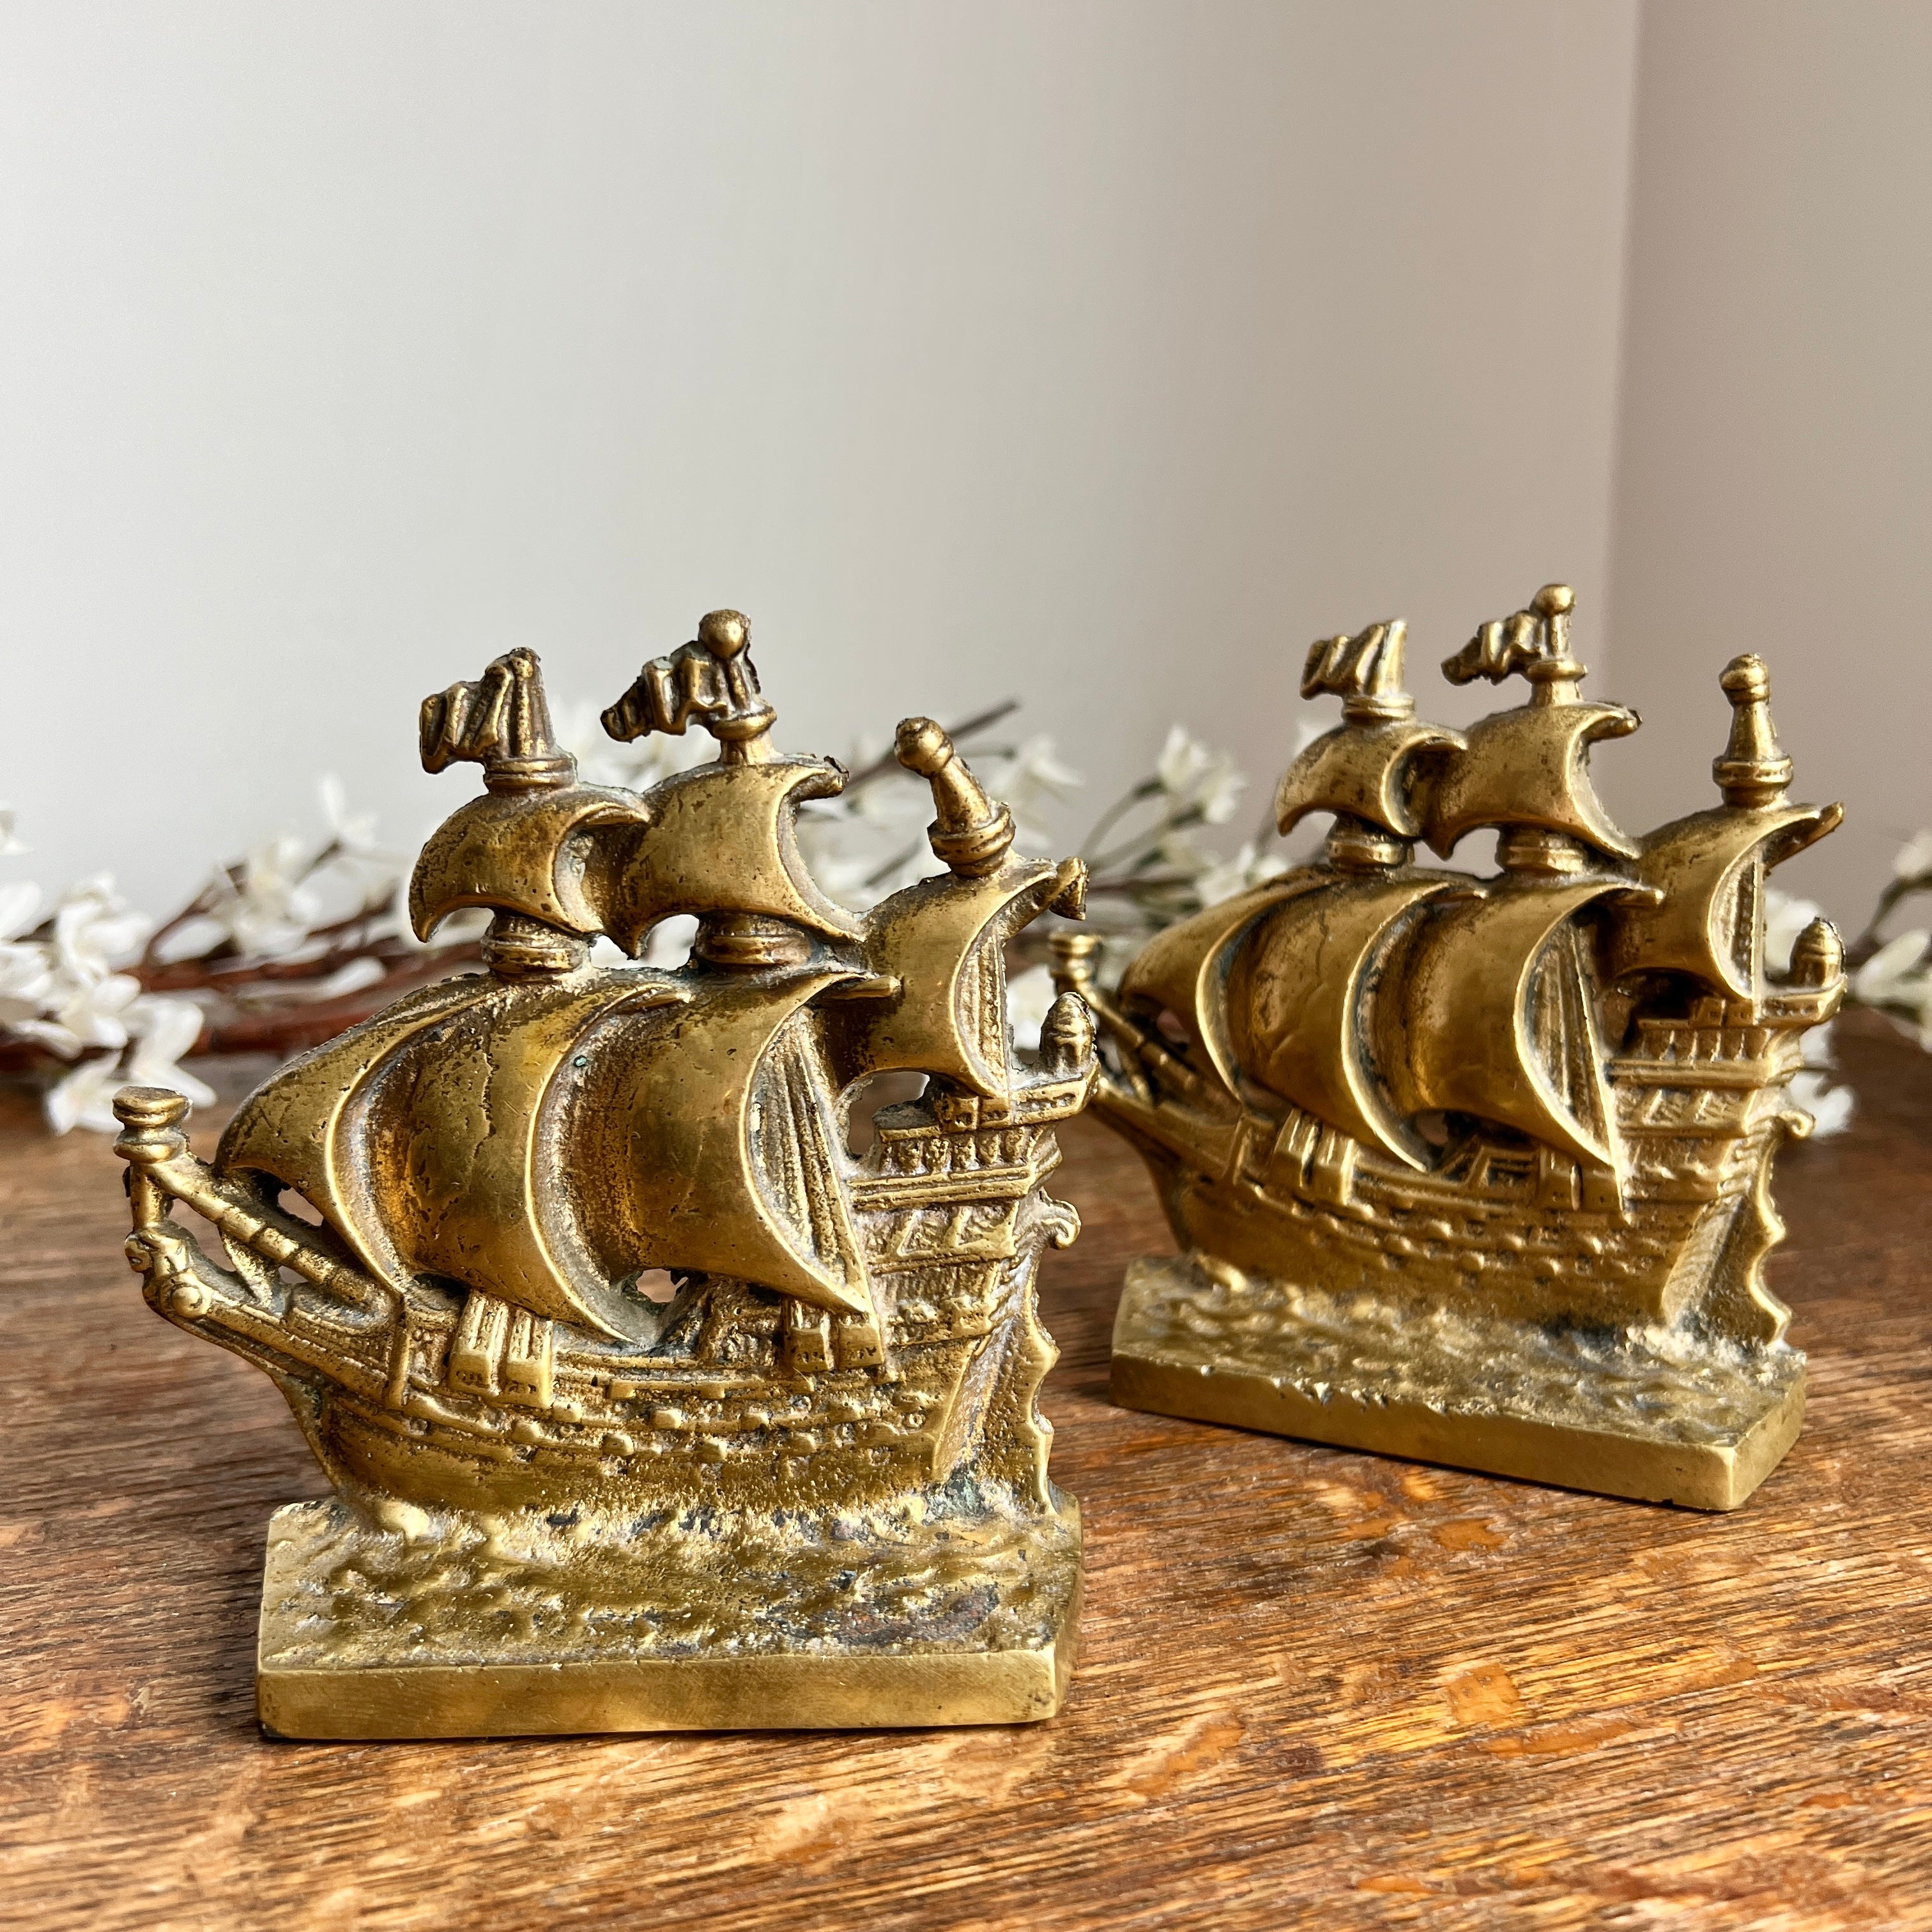 Collectable Brass Ship - 431 For Sale on 1stDibs